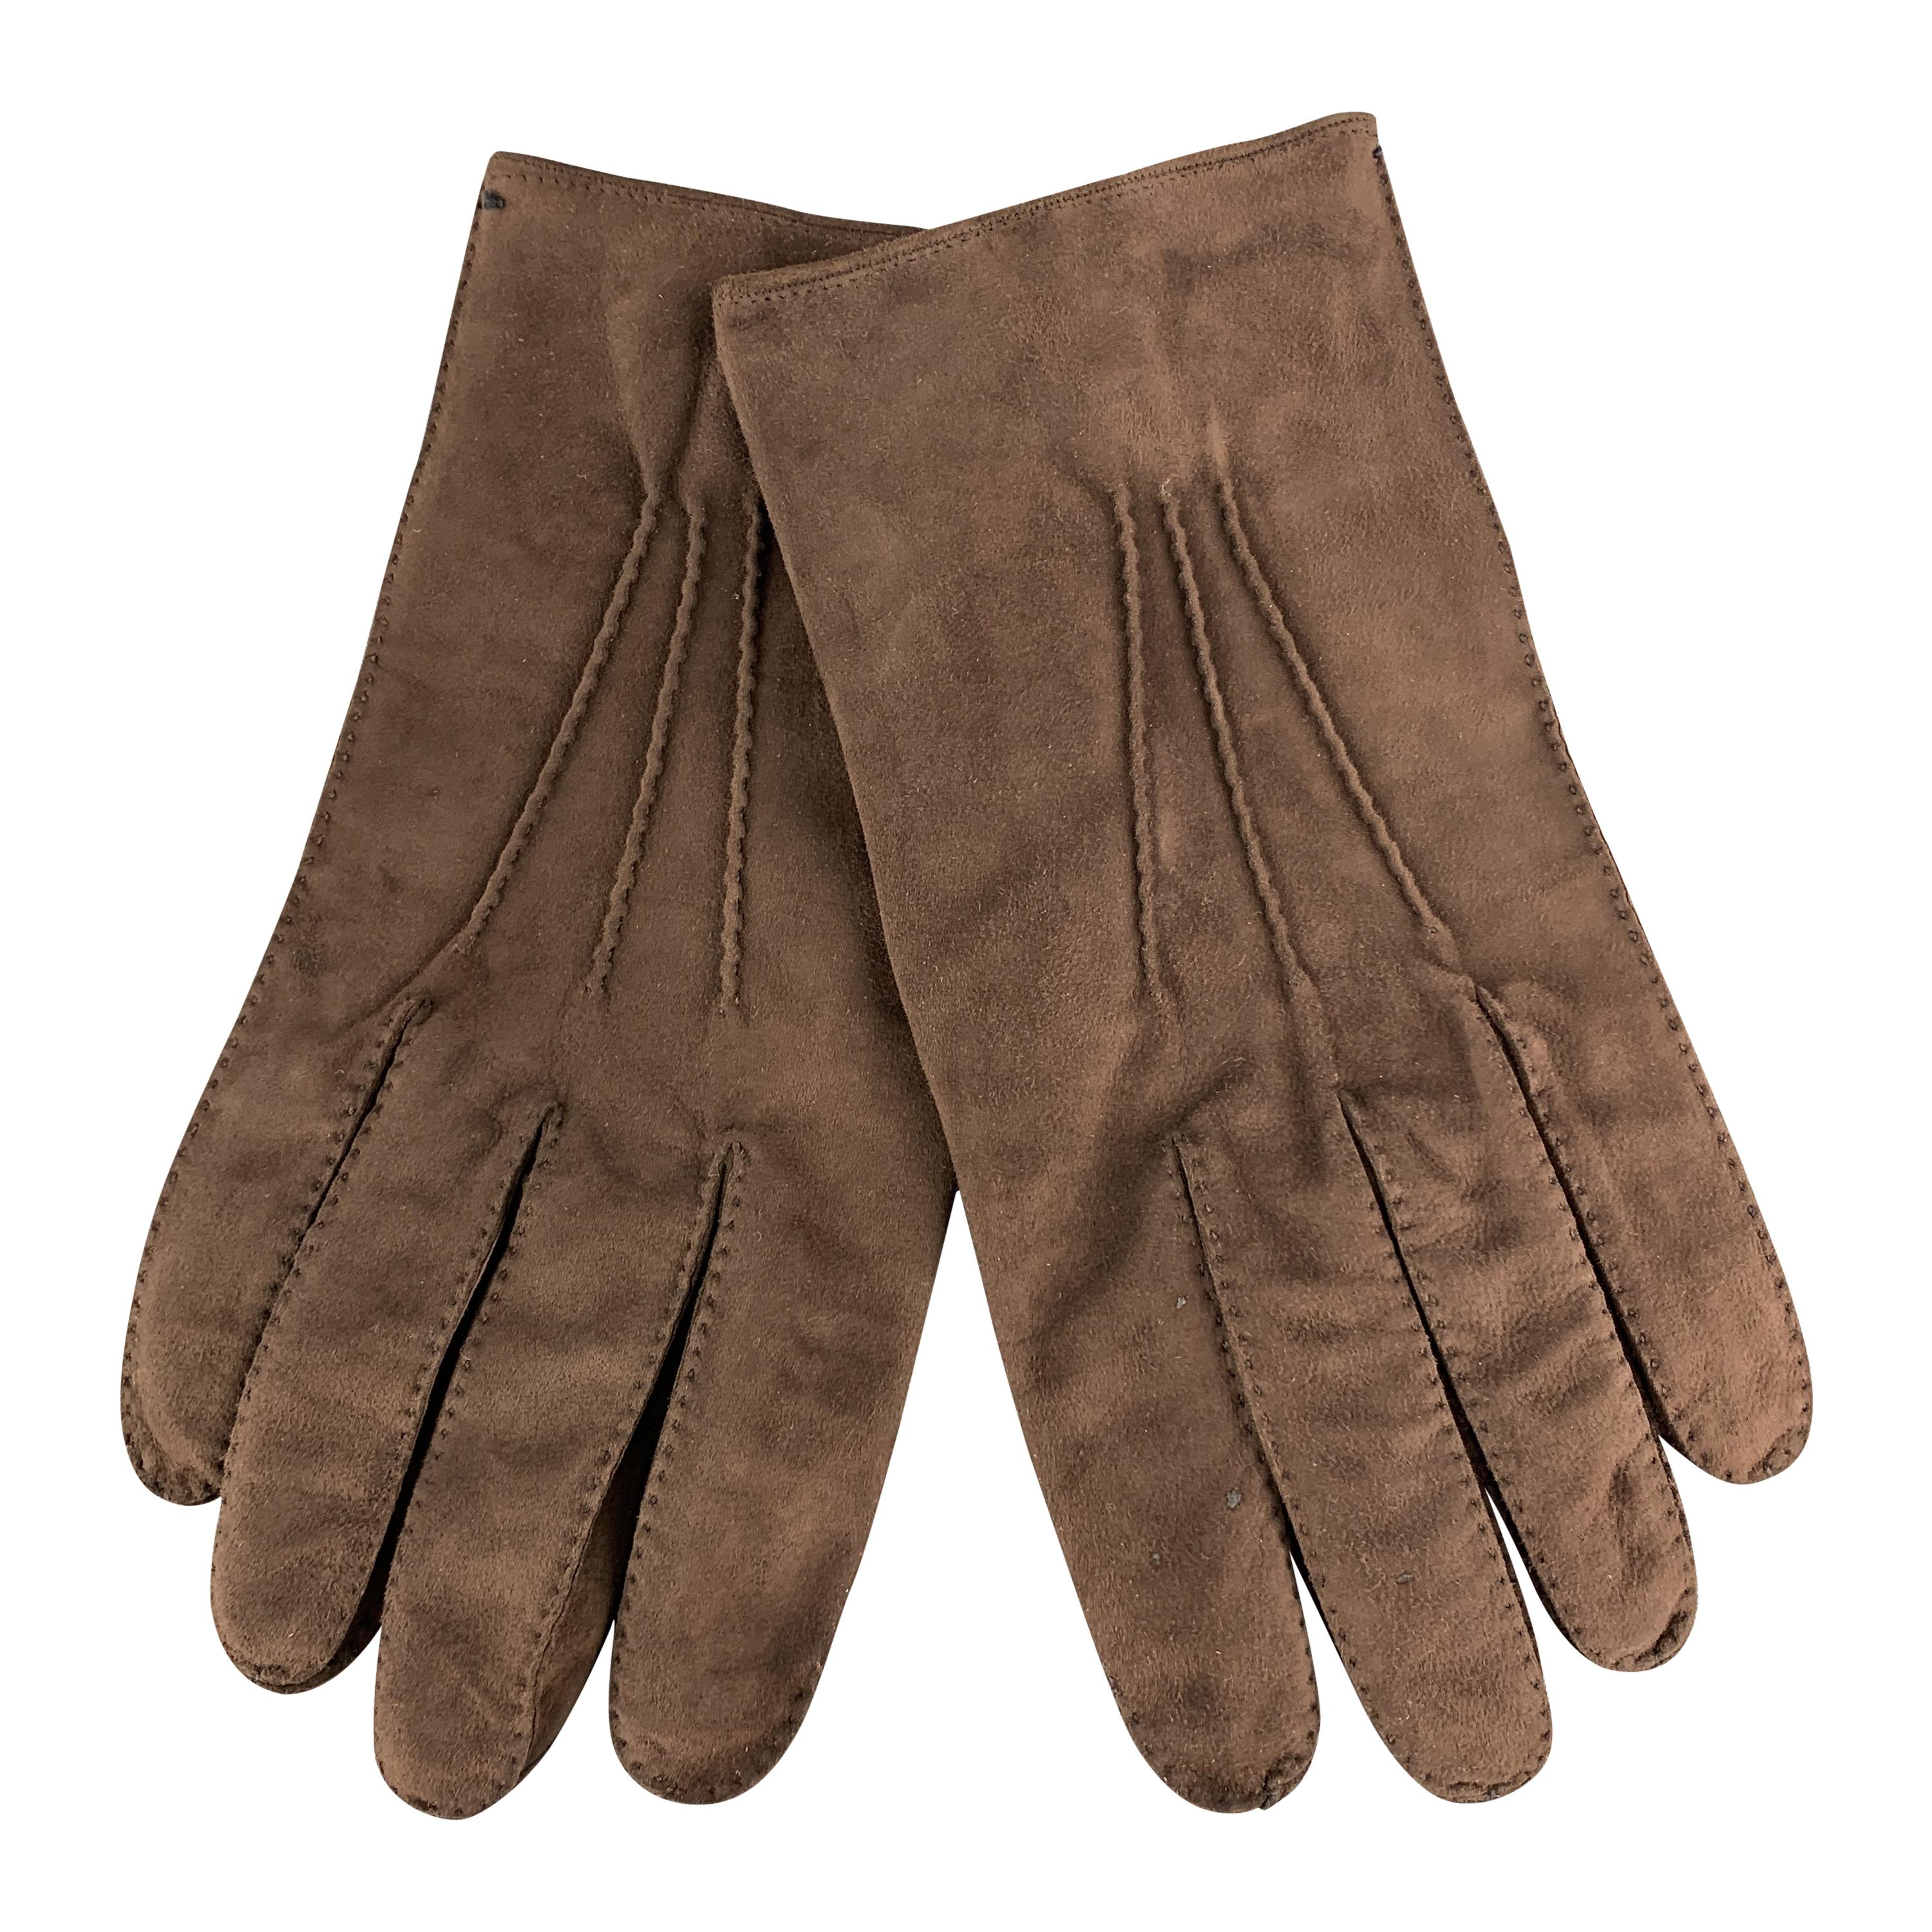 MADOVA Size 9 1/2 Brown Suede Gloves